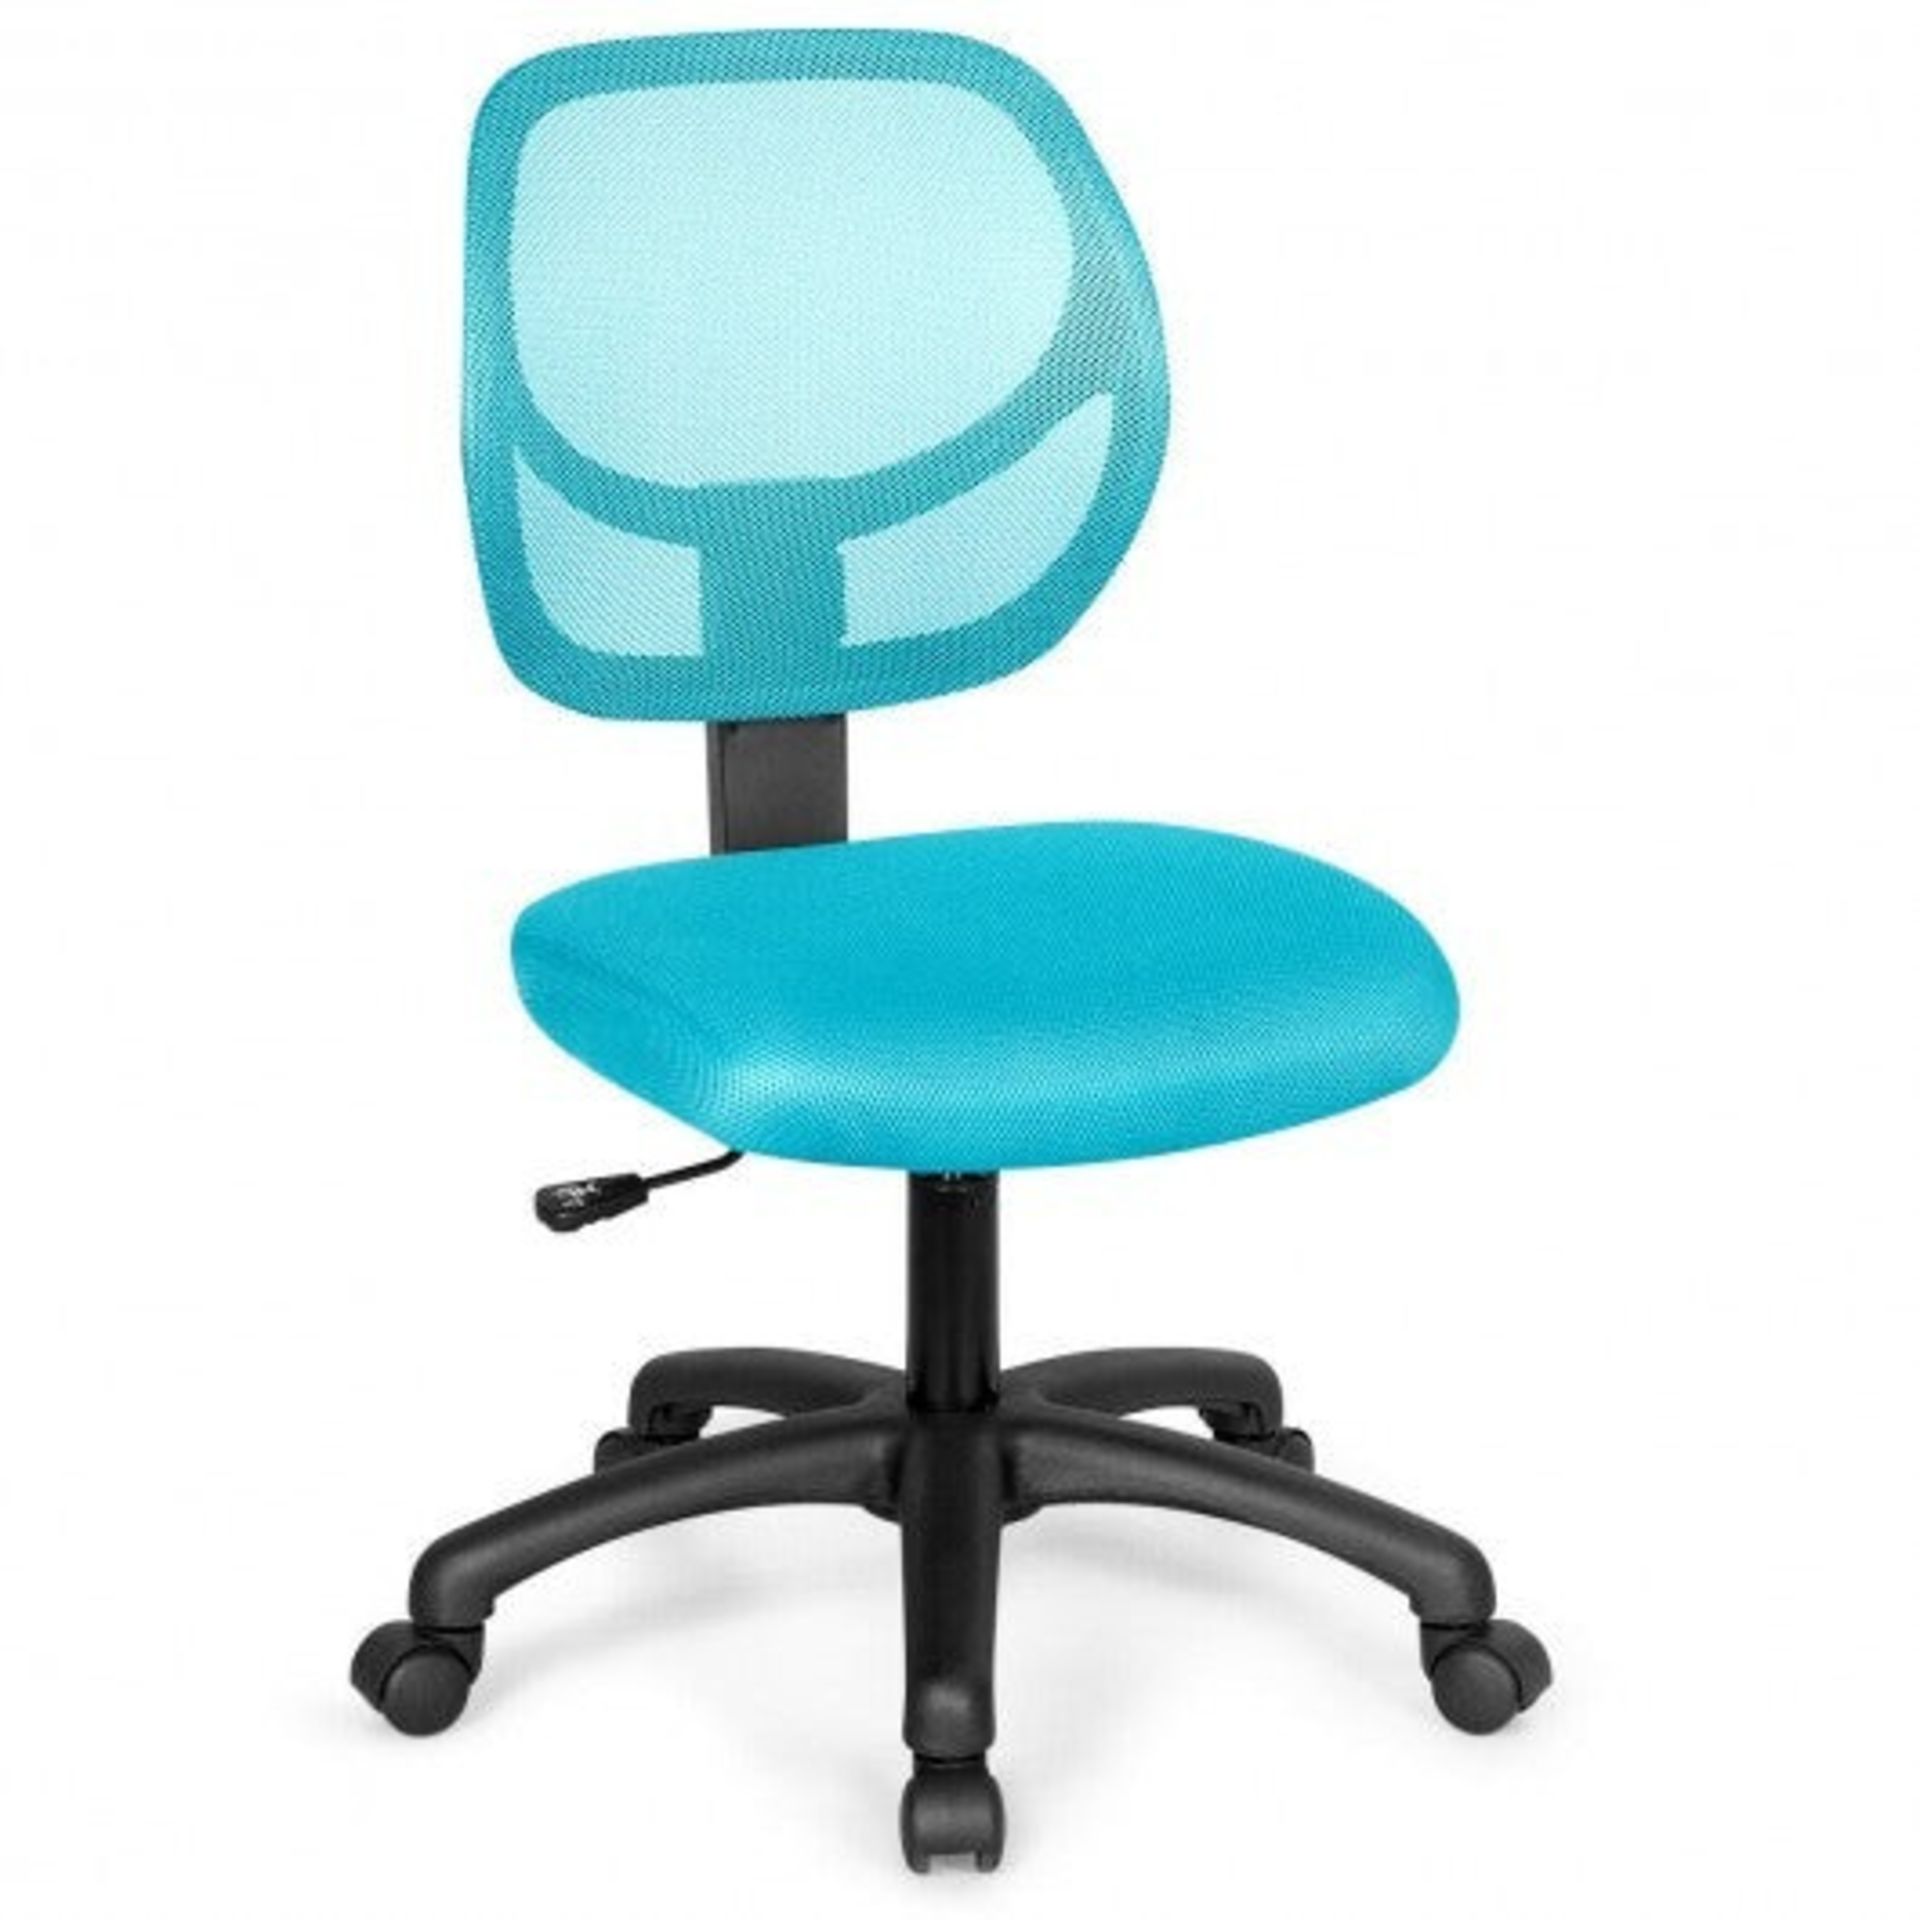 Low-back Computer Task Office Desk Chair with Swivel Casters-Green - ER54